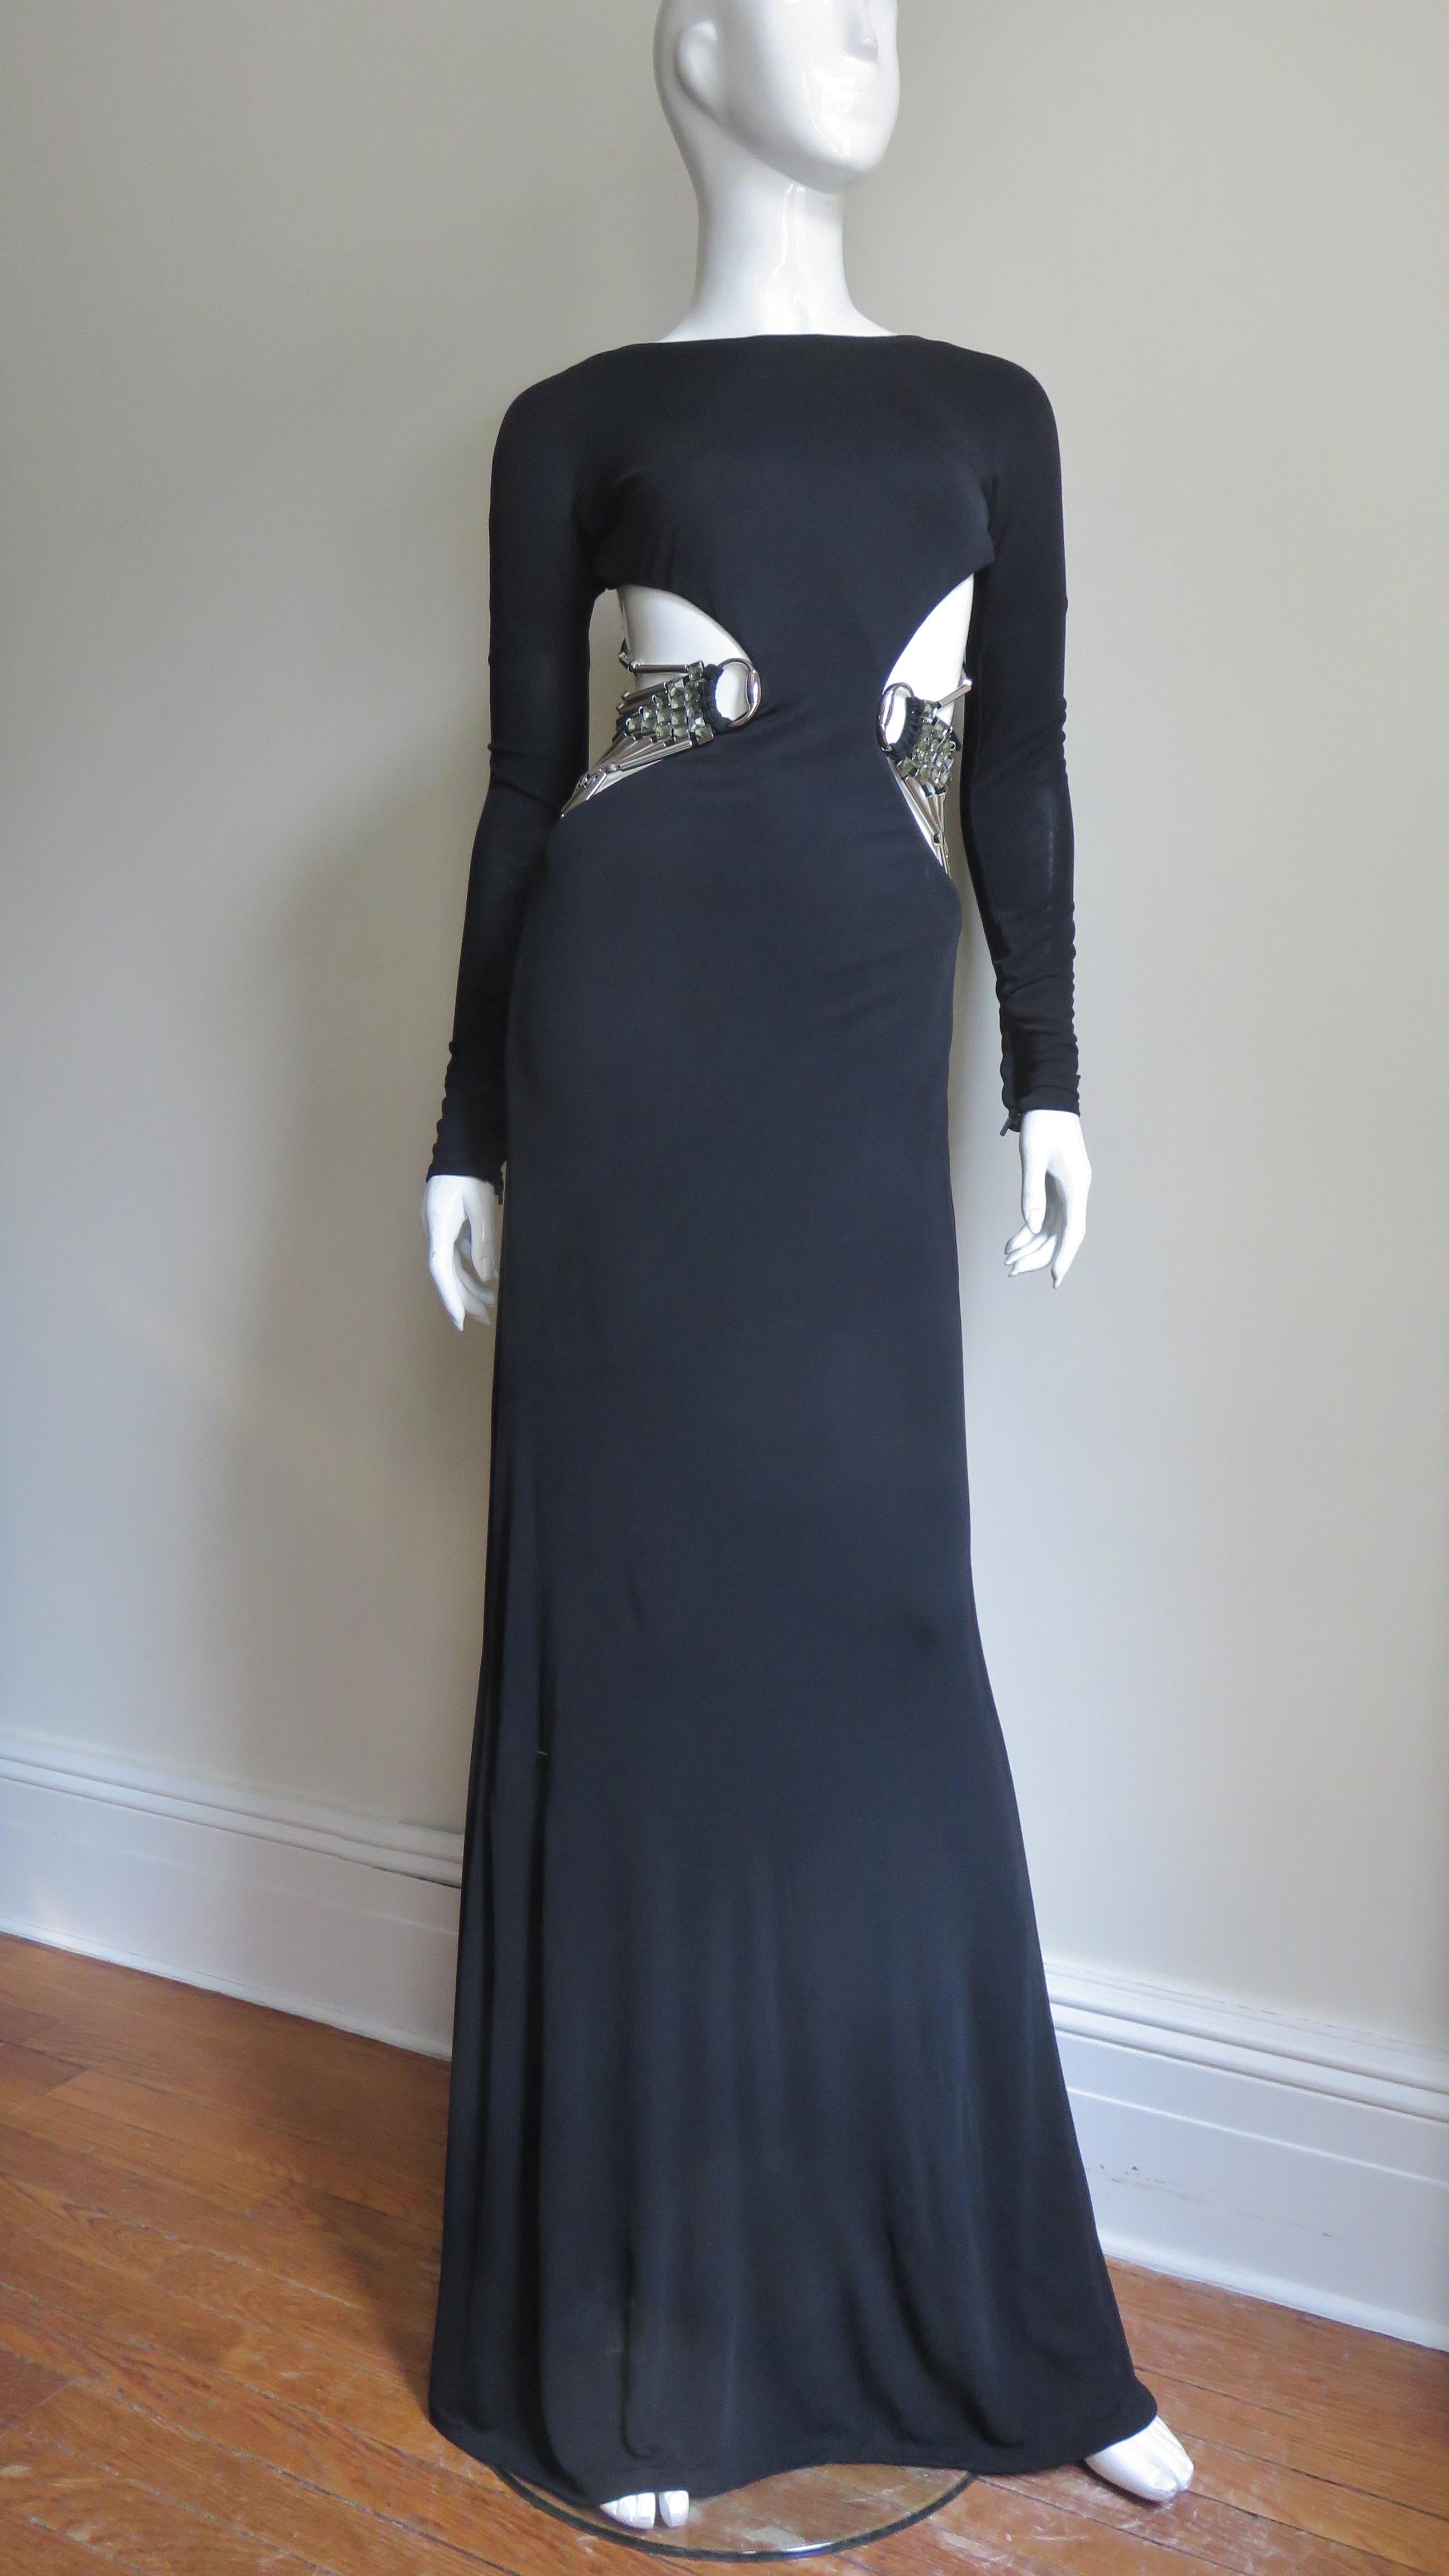 A gorgeous black silk knit gown from Gucci's S/S 2010 collection as worn on the cover of Vogue by Linda Evangelista.  It is fitted, has long sleeves with zipper wrists and fabulous side cut outs from below the bust through to the upper hips in the